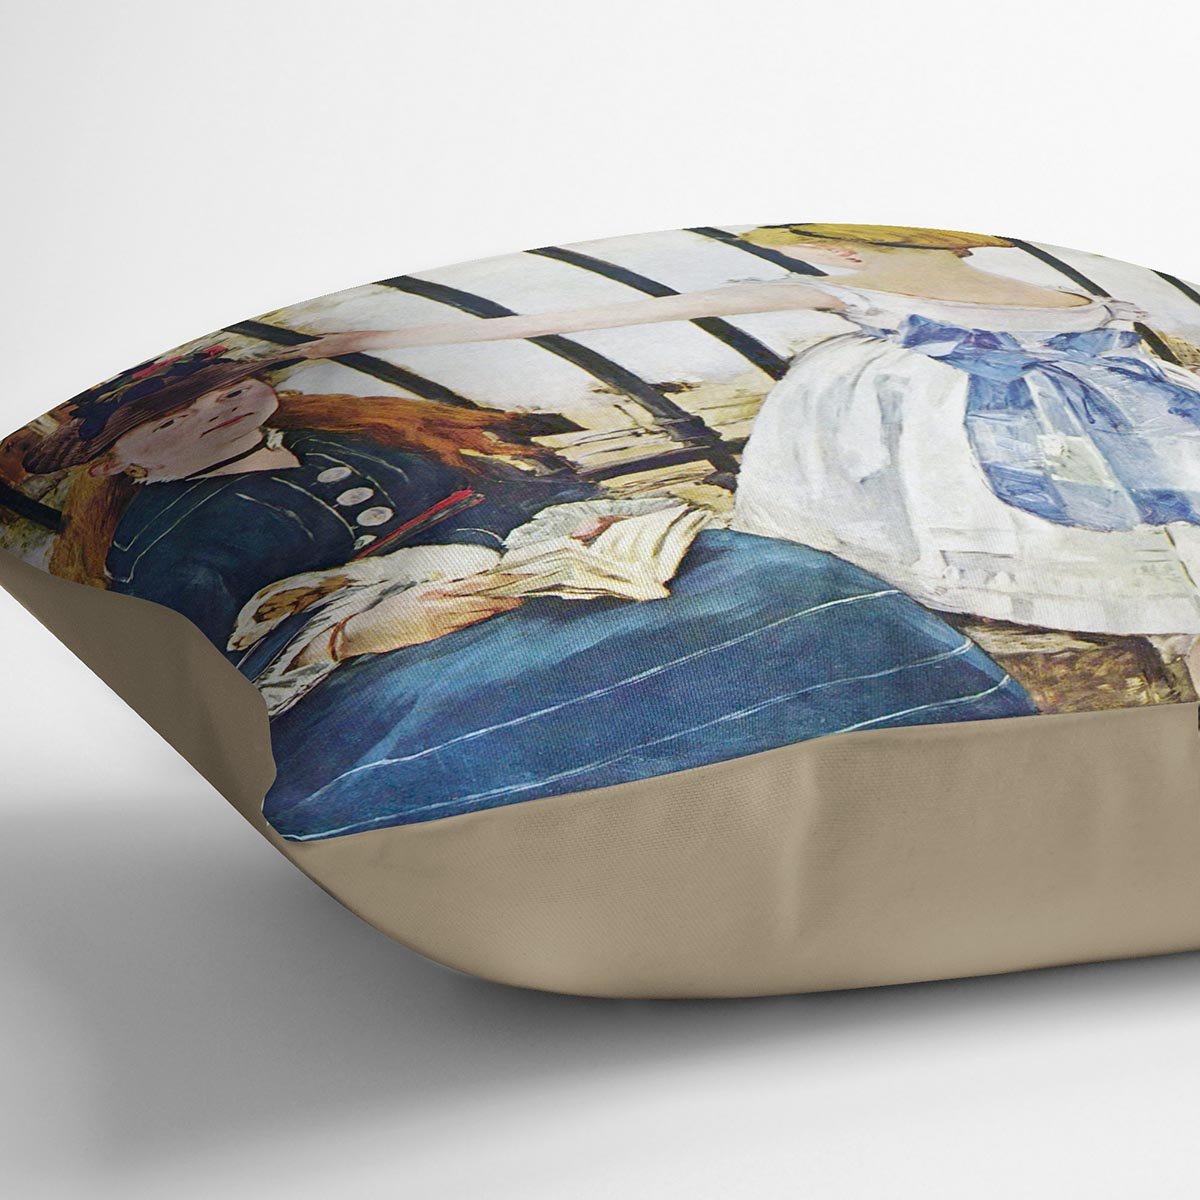 Railway by Manet Throw Pillow